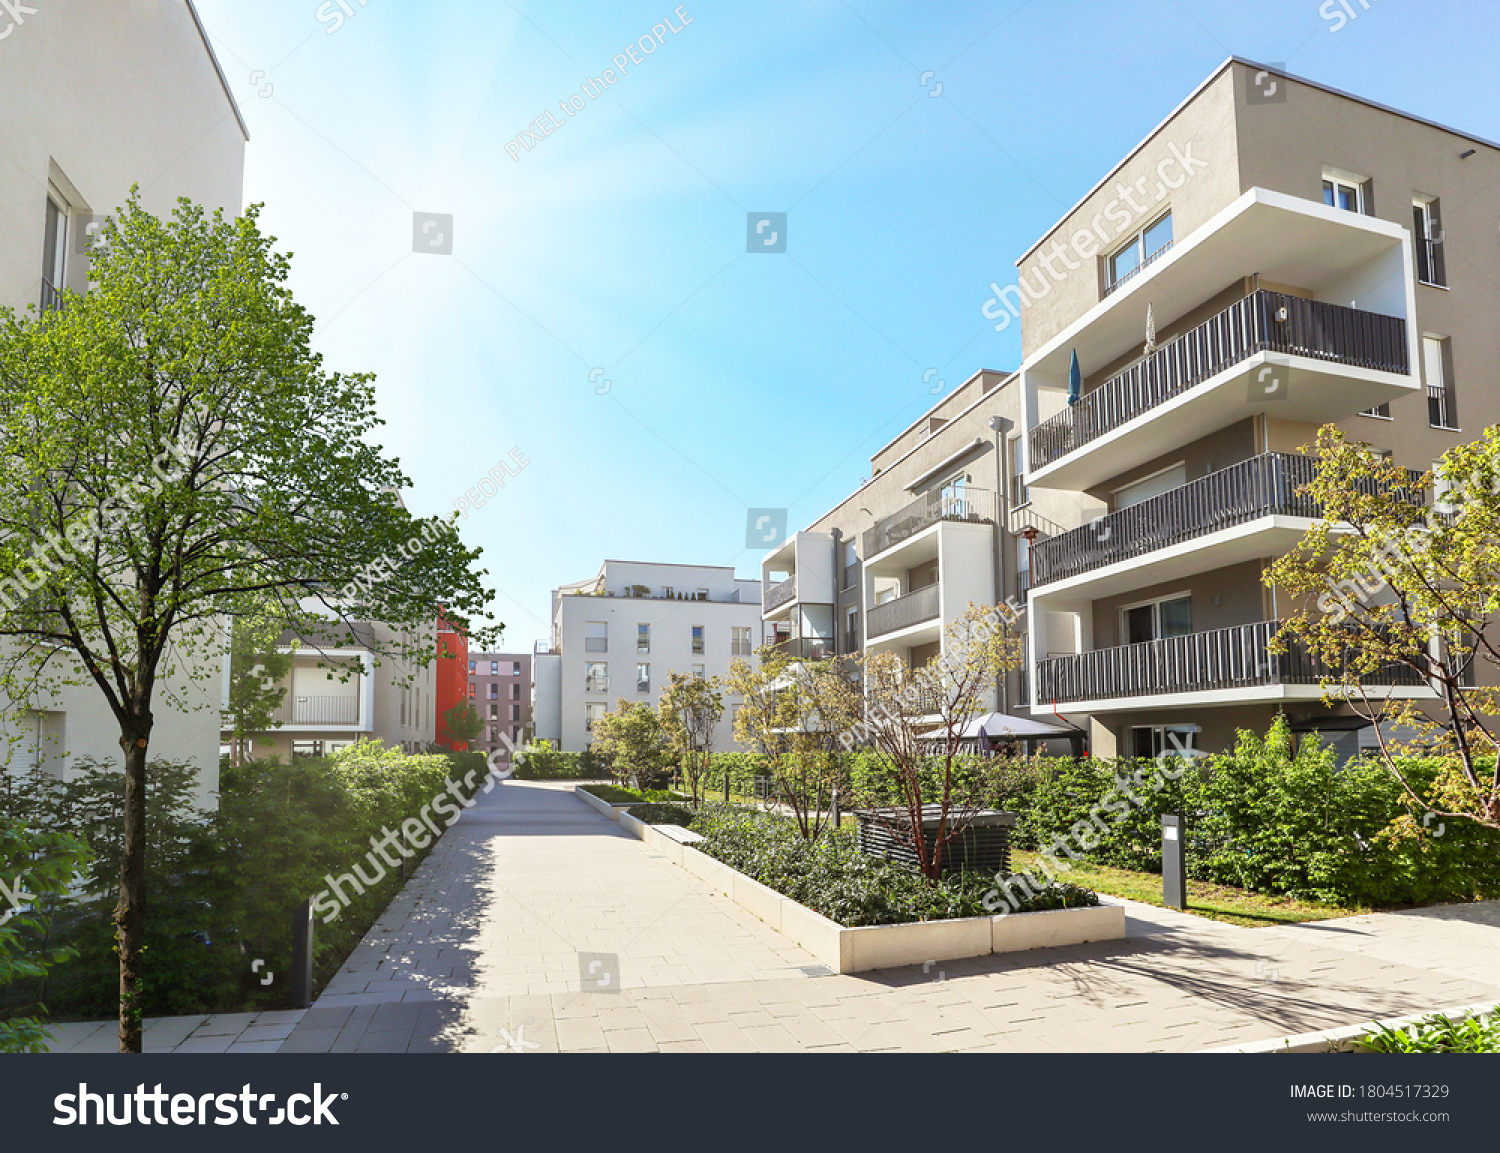 Cityscape with modern apartment buildings in a new residential area in the city, Concept for construction industy, estate agent and sale of condominiums #1804517329